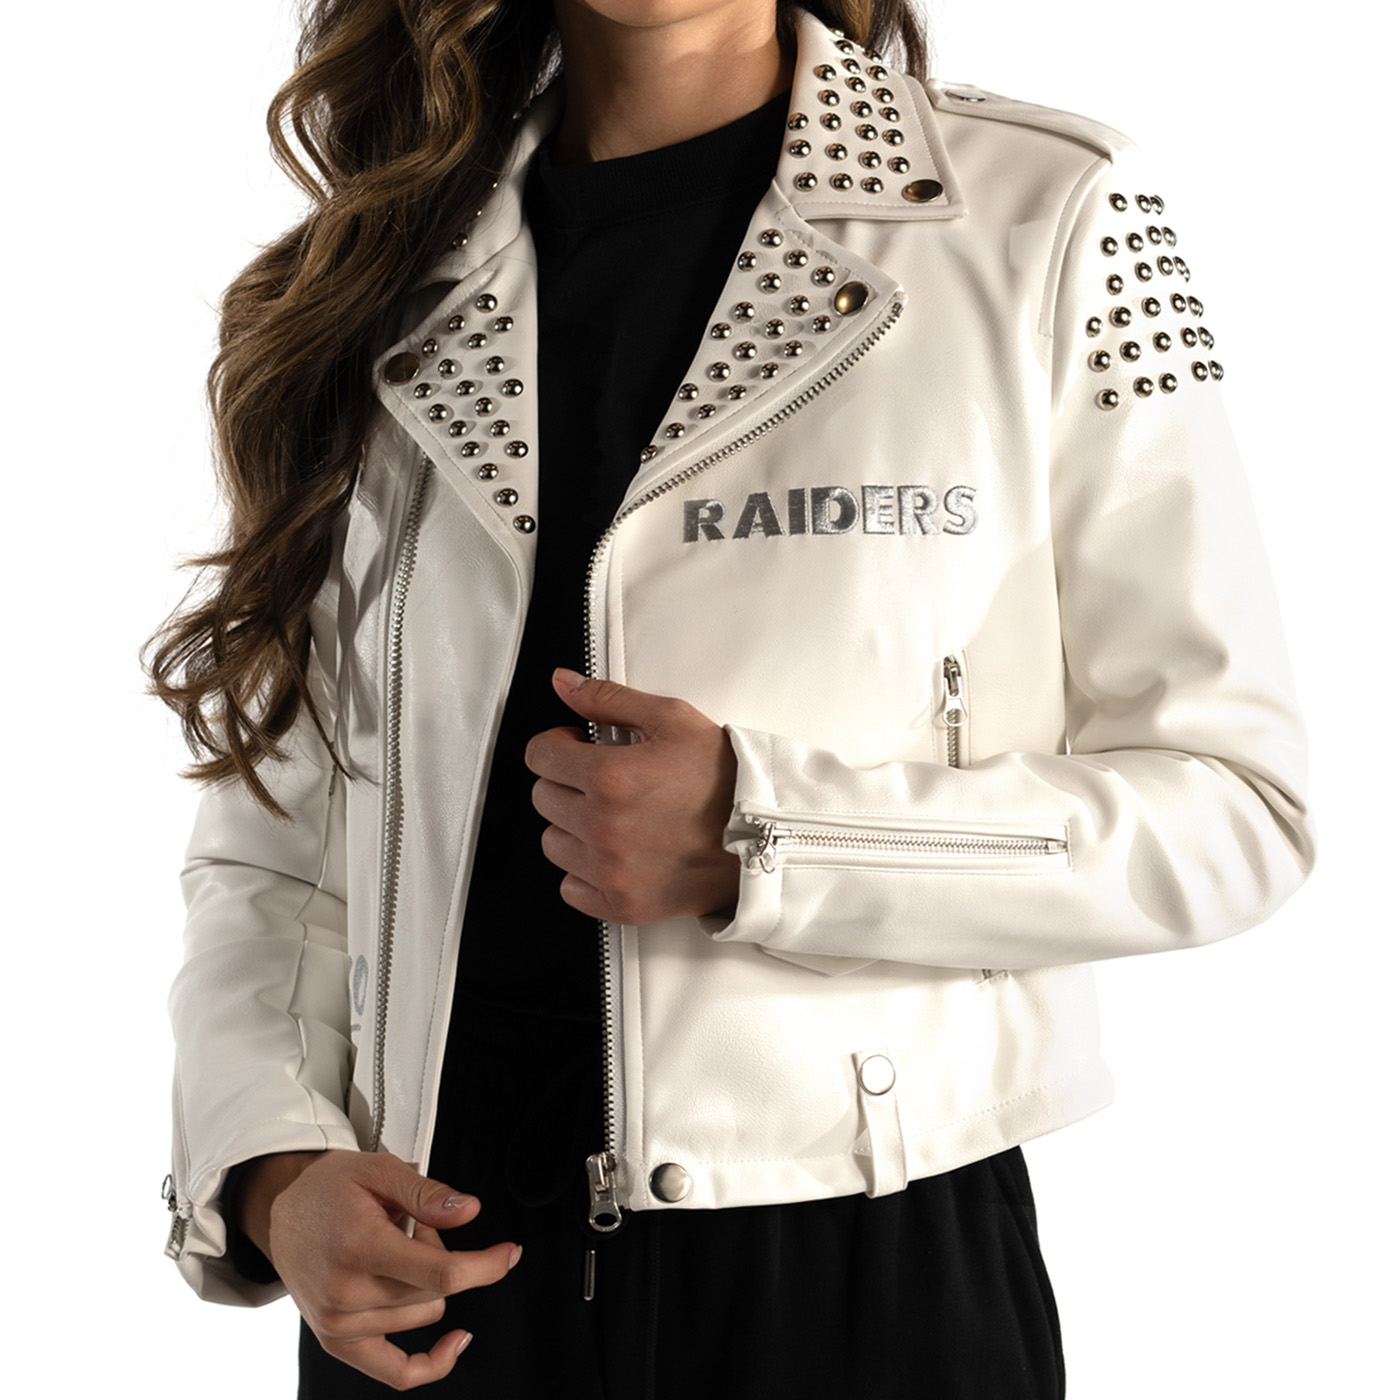 Women's White Leather & Faux Leather Jackets